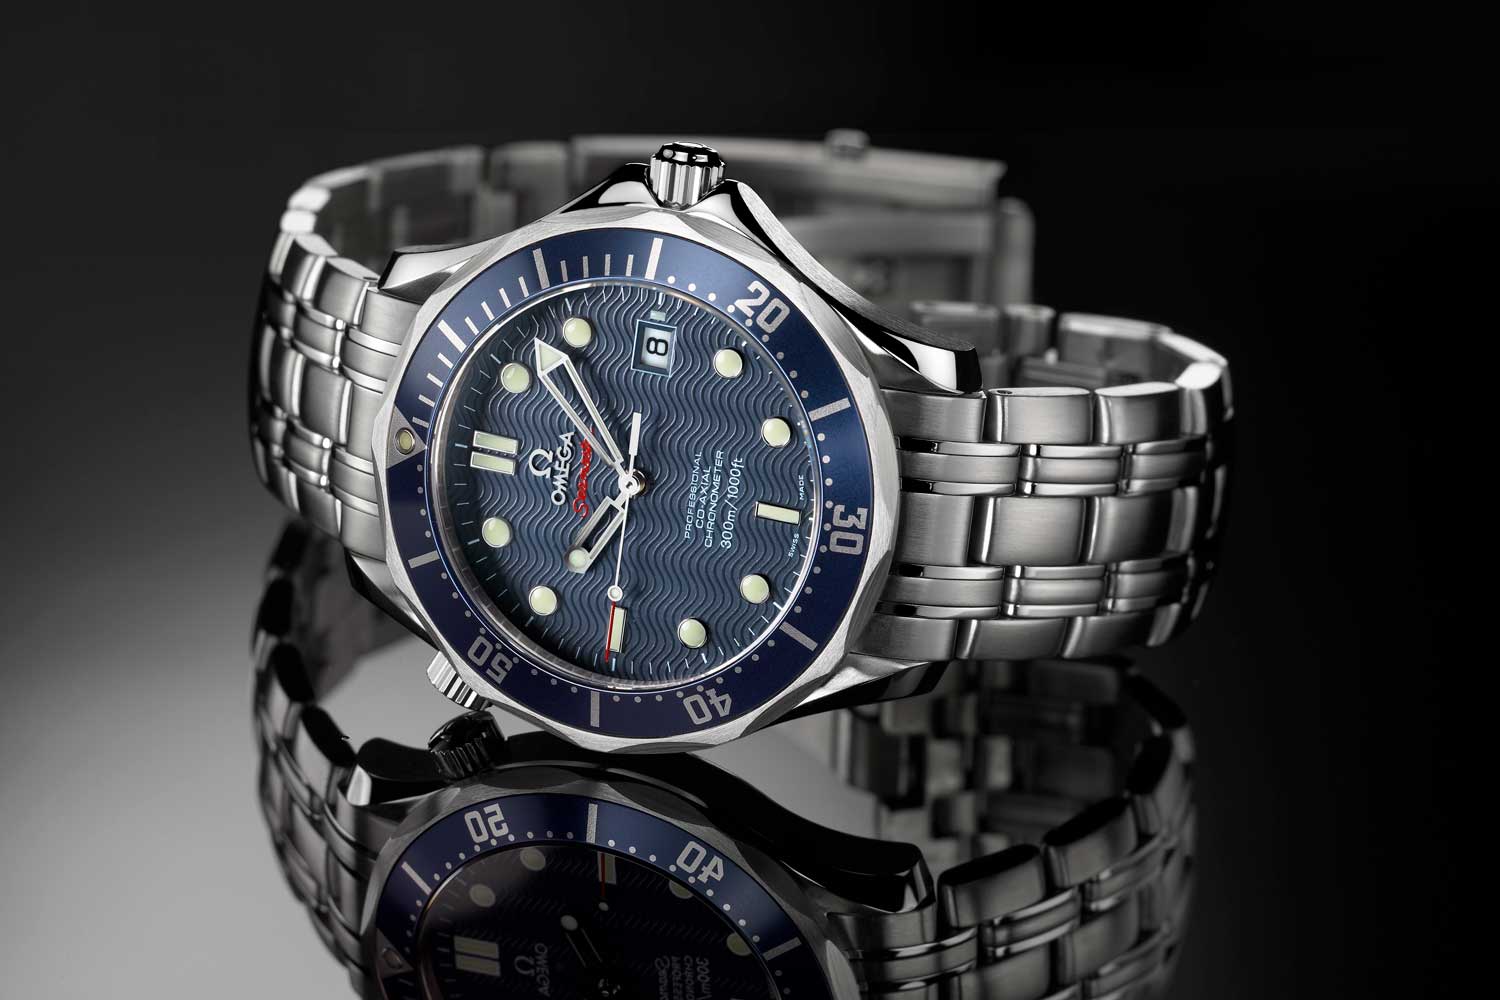 The Seamaster 300M ref. 2220.80 that James Bond wore in Casino Royale